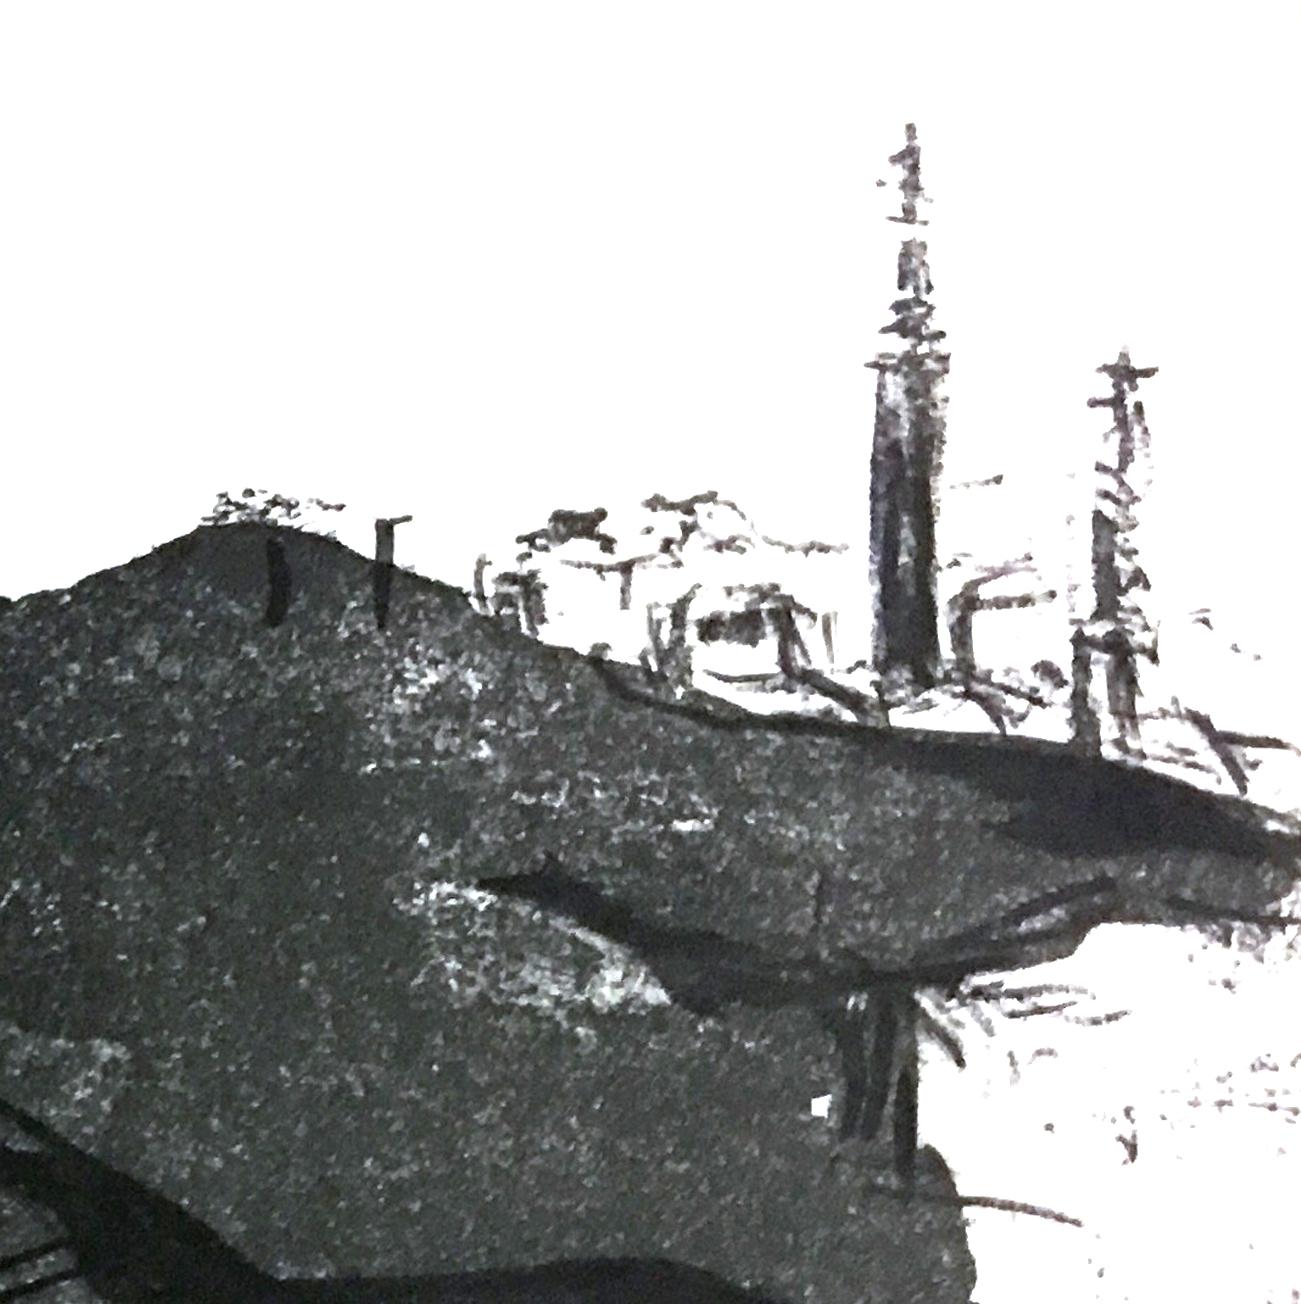 “Landscape number 11” black and white landscape abstracts a distant city view  - Art by Zahra Nazari